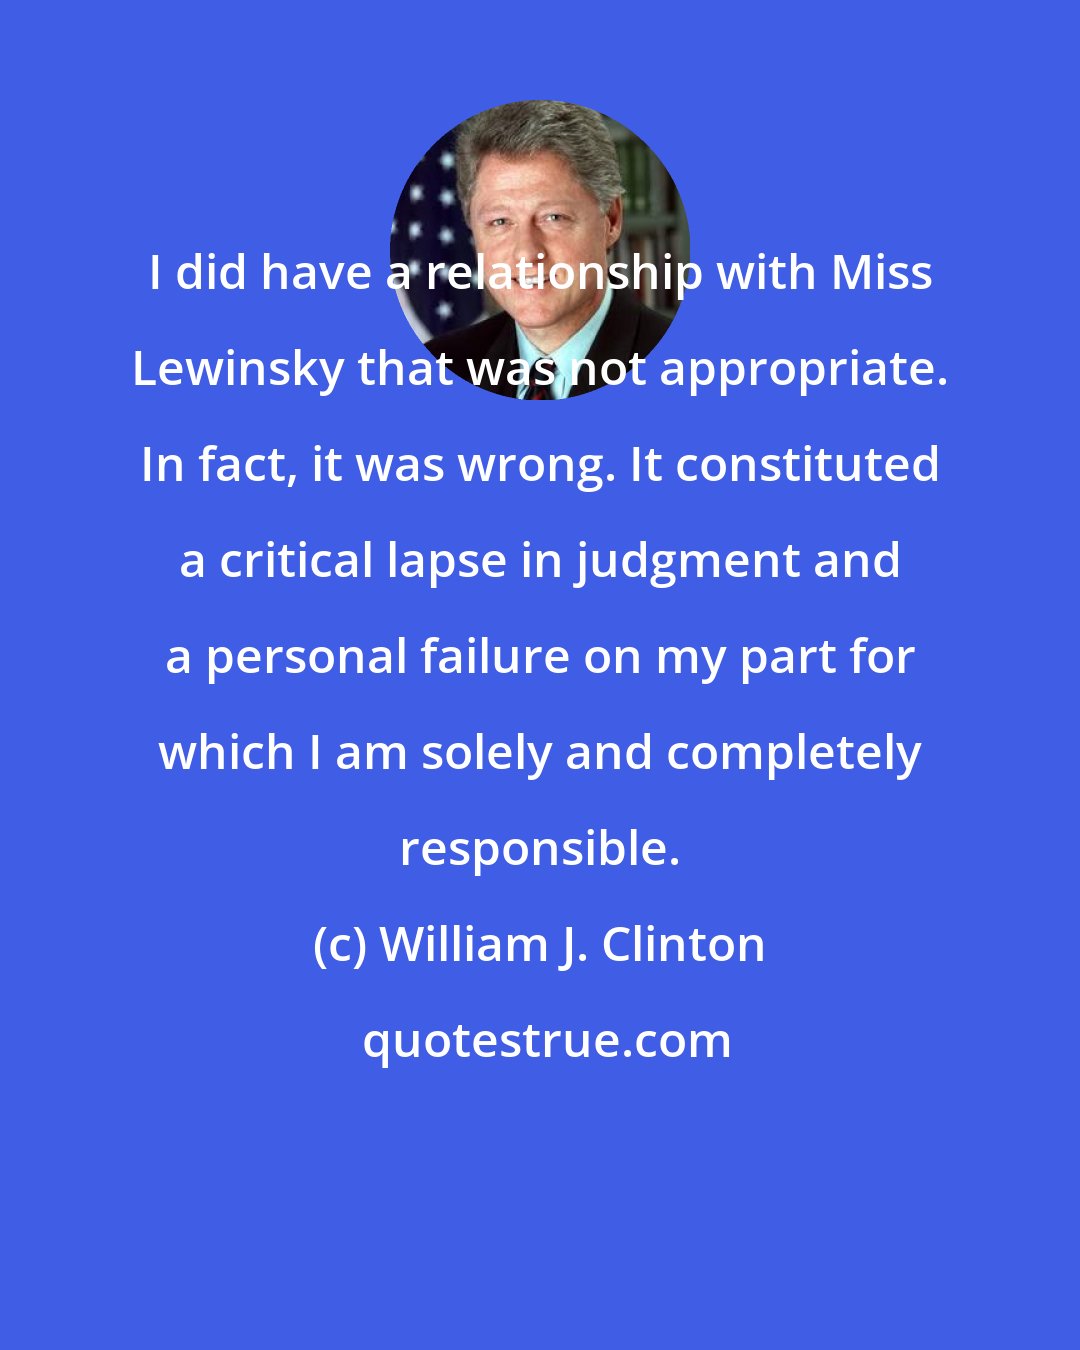 William J. Clinton: I did have a relationship with Miss Lewinsky that was not appropriate. In fact, it was wrong. It constituted a critical lapse in judgment and a personal failure on my part for which I am solely and completely responsible.